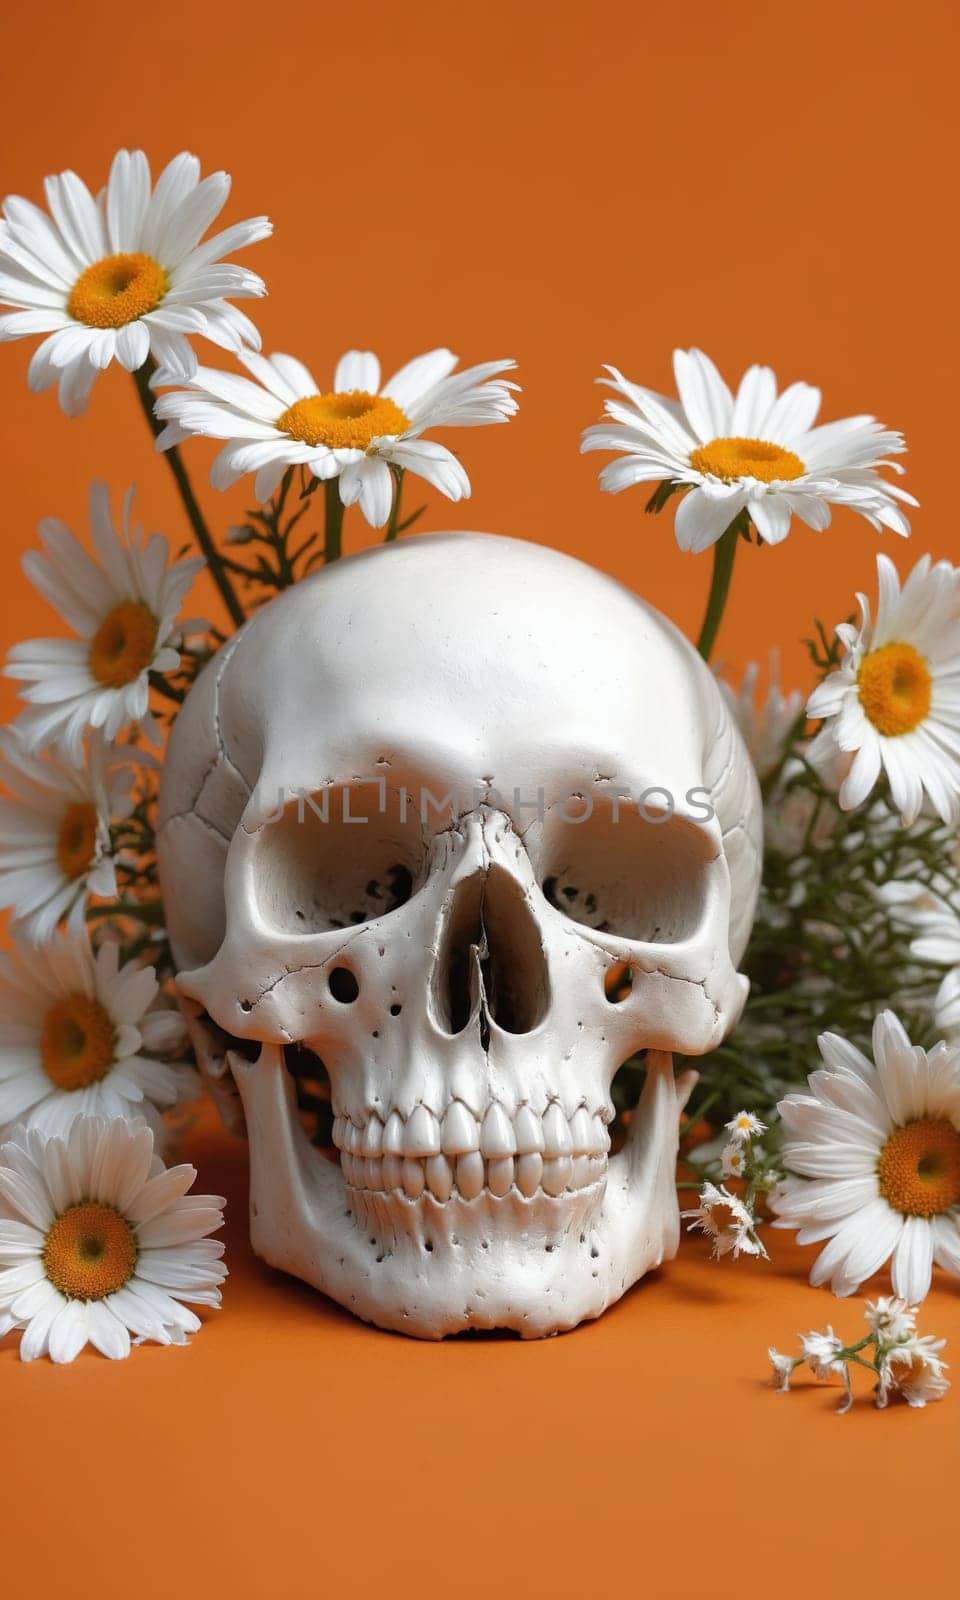 Skull and daisies on orange background. Halloween concept. by Andre1ns